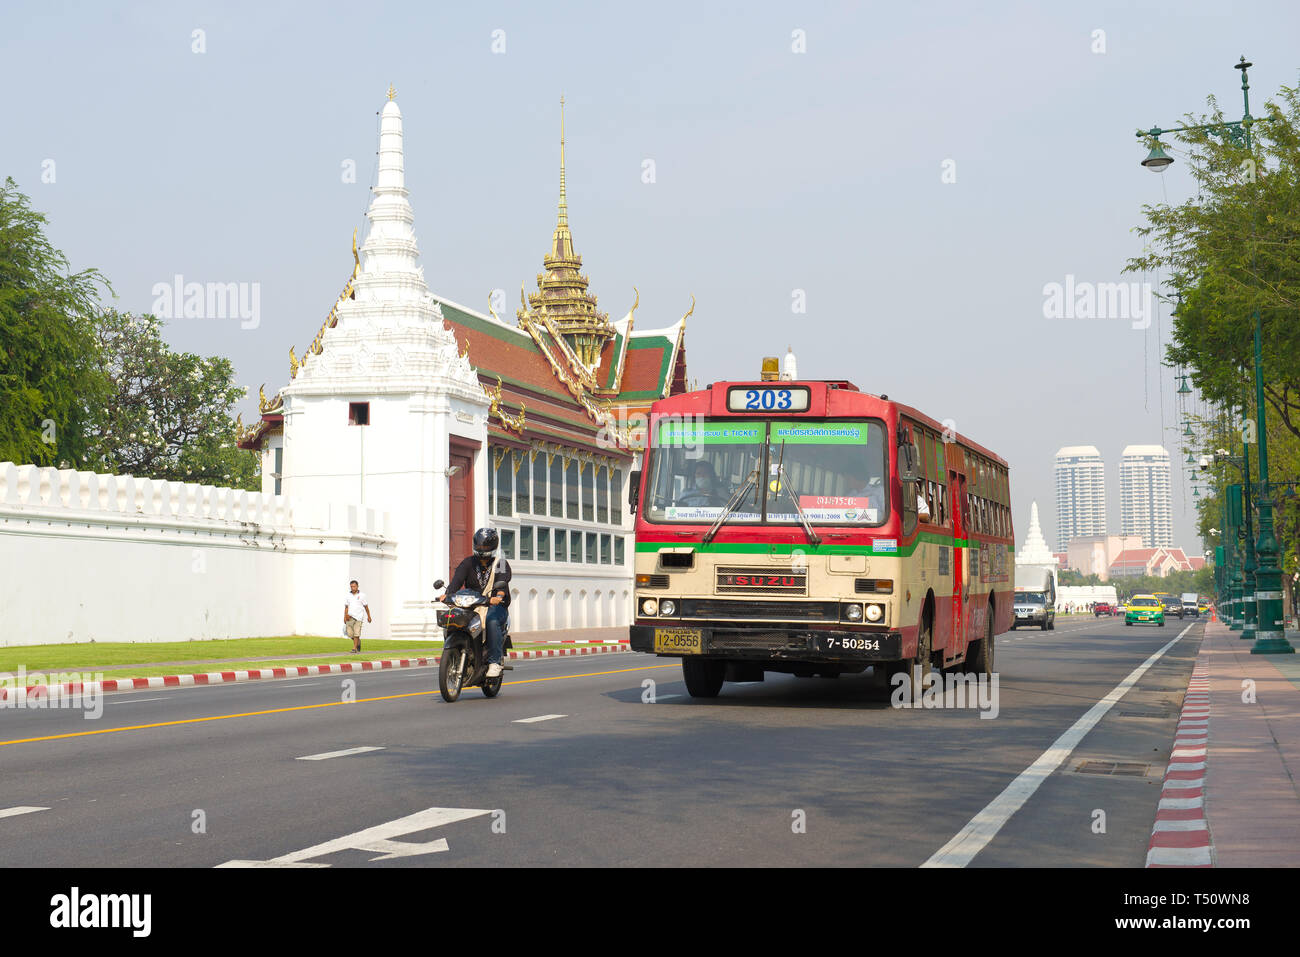 BANGKOK, THAILAND - DECEMBER 28, 2018: City bus route number 203 at the walls of the Royal Palace on a sunny morning Stock Photo